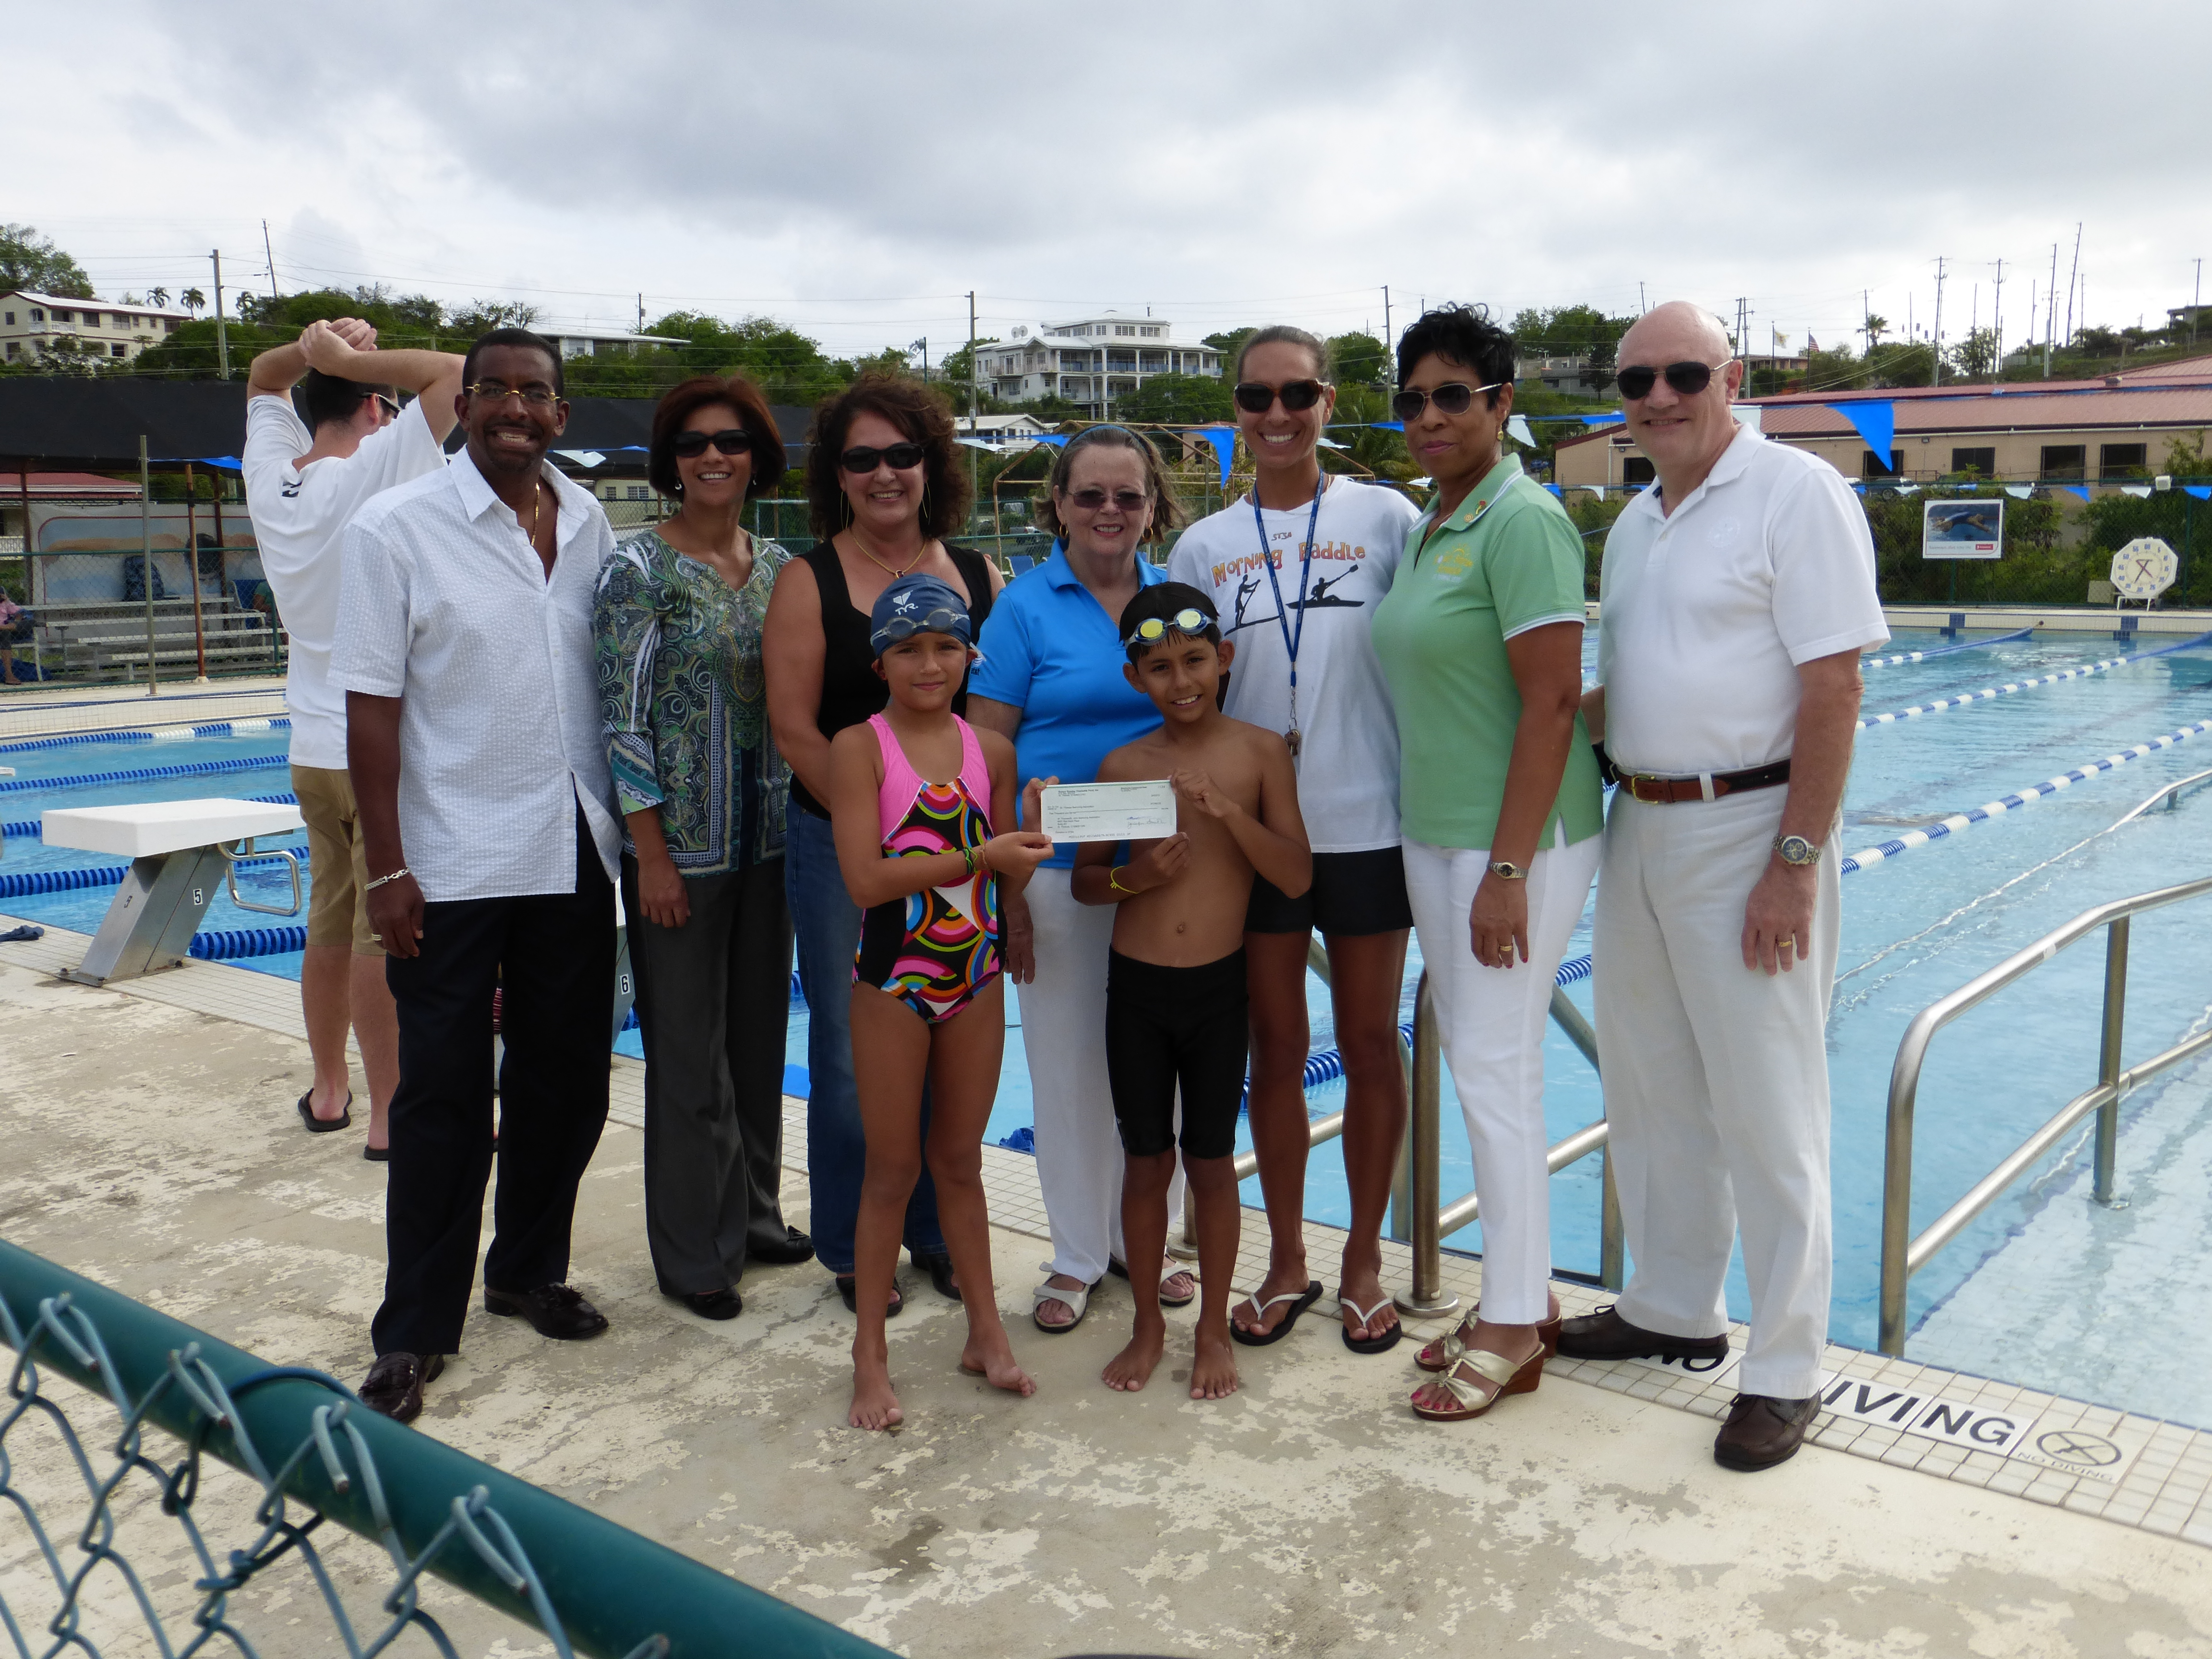 Standing in front (left to right) are STSA Stingrays and triathletes Audrey Moore and Diego Villegas.  In back are STSA board members Frank Odlum and Madel Villegas (a triathlon volunteer);  Rotary Sunrise members Susan MacFarland-Helton and Diana Parker; STSA Liz Estes (the triathlon swim coordinator); Pat and Nigel Bailey of Rotary Sunrise.